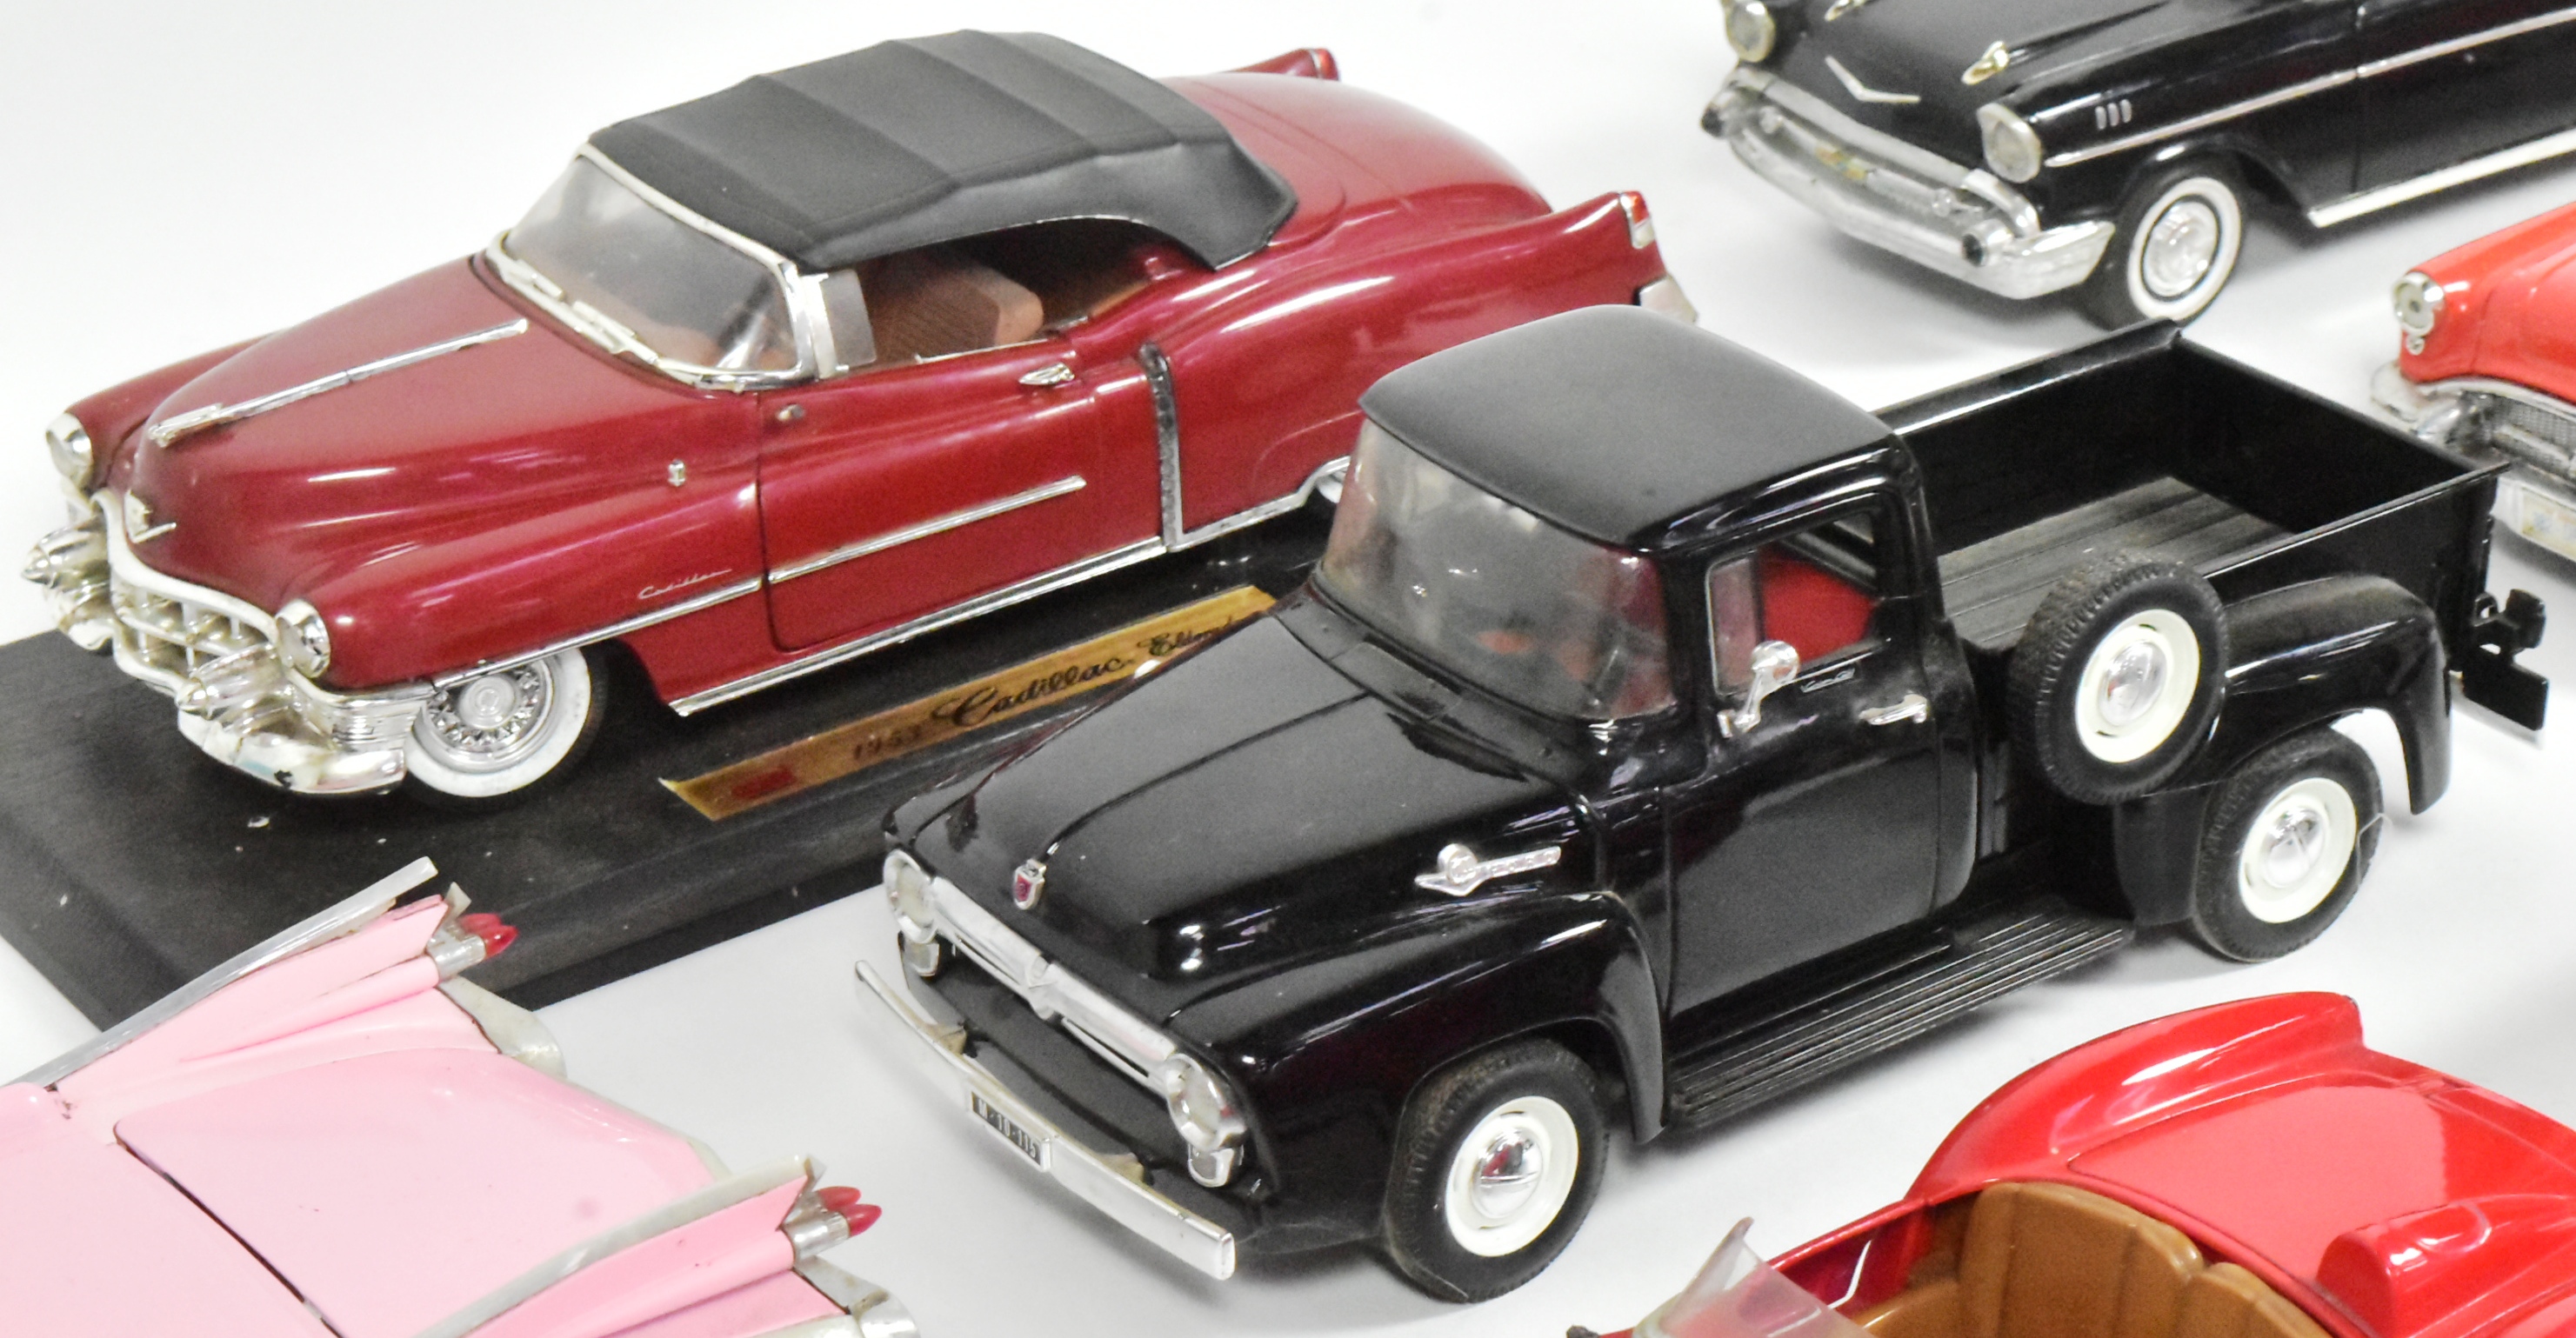 DIECAST - COLLECTION OF 1/18 SCALE DIECAST MODEL CARS - Image 4 of 6